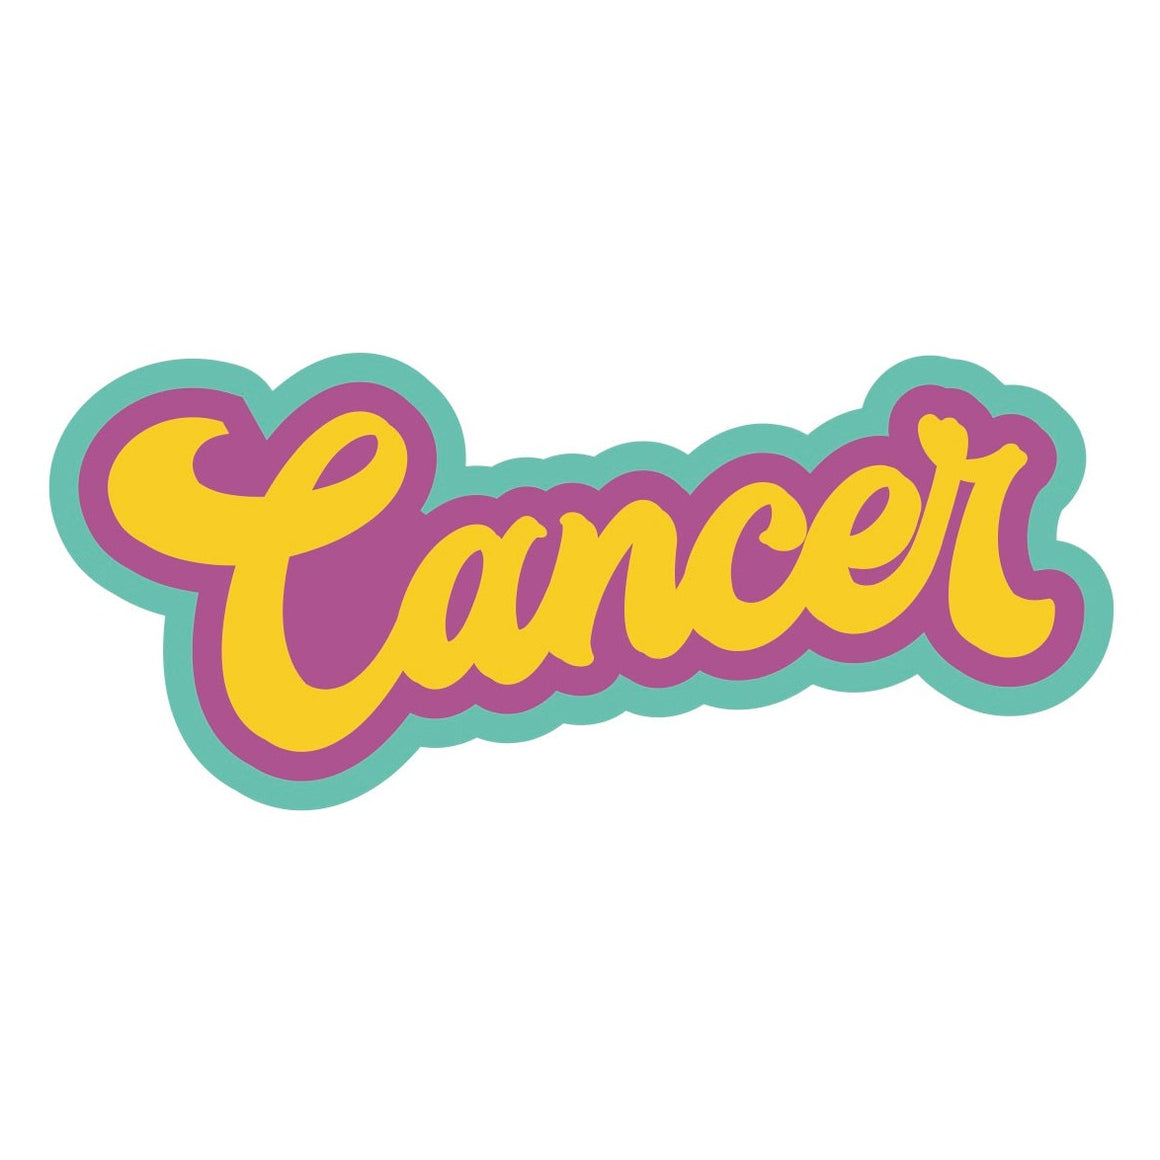 Yellow letters horoscope CANCER sticker.